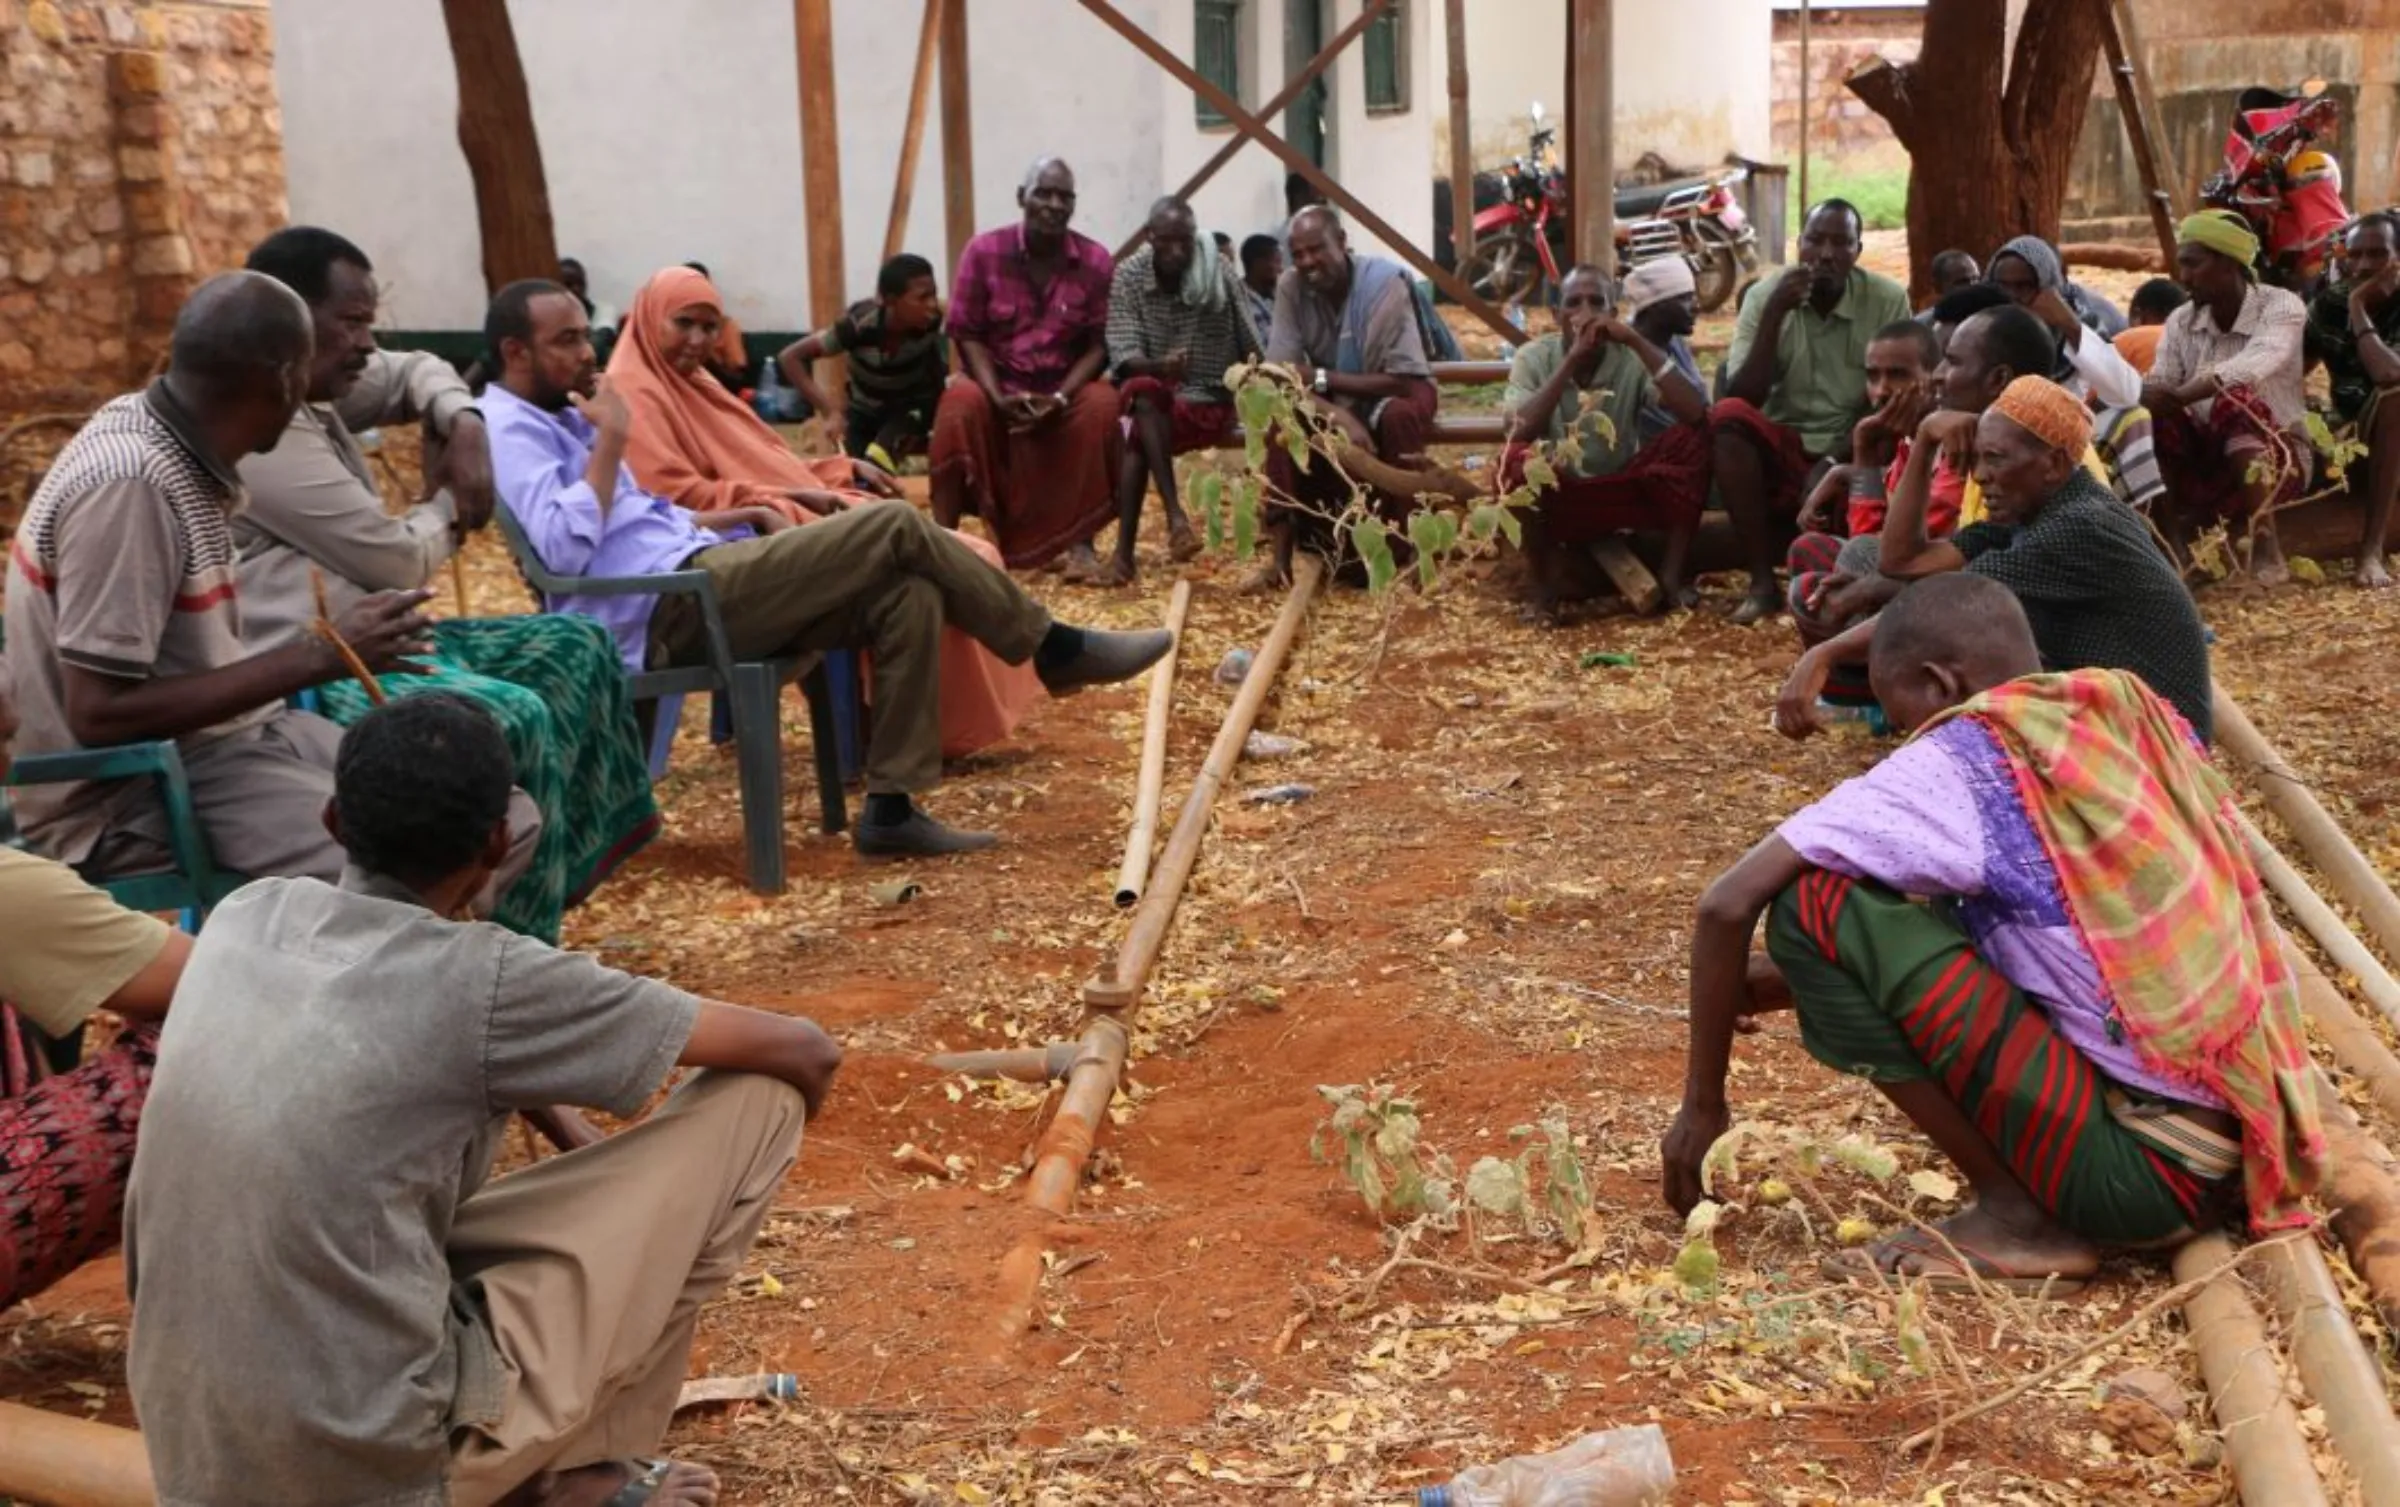 County government officials consorts with the community on climate financing in Wajir, northern Kenya, 2018